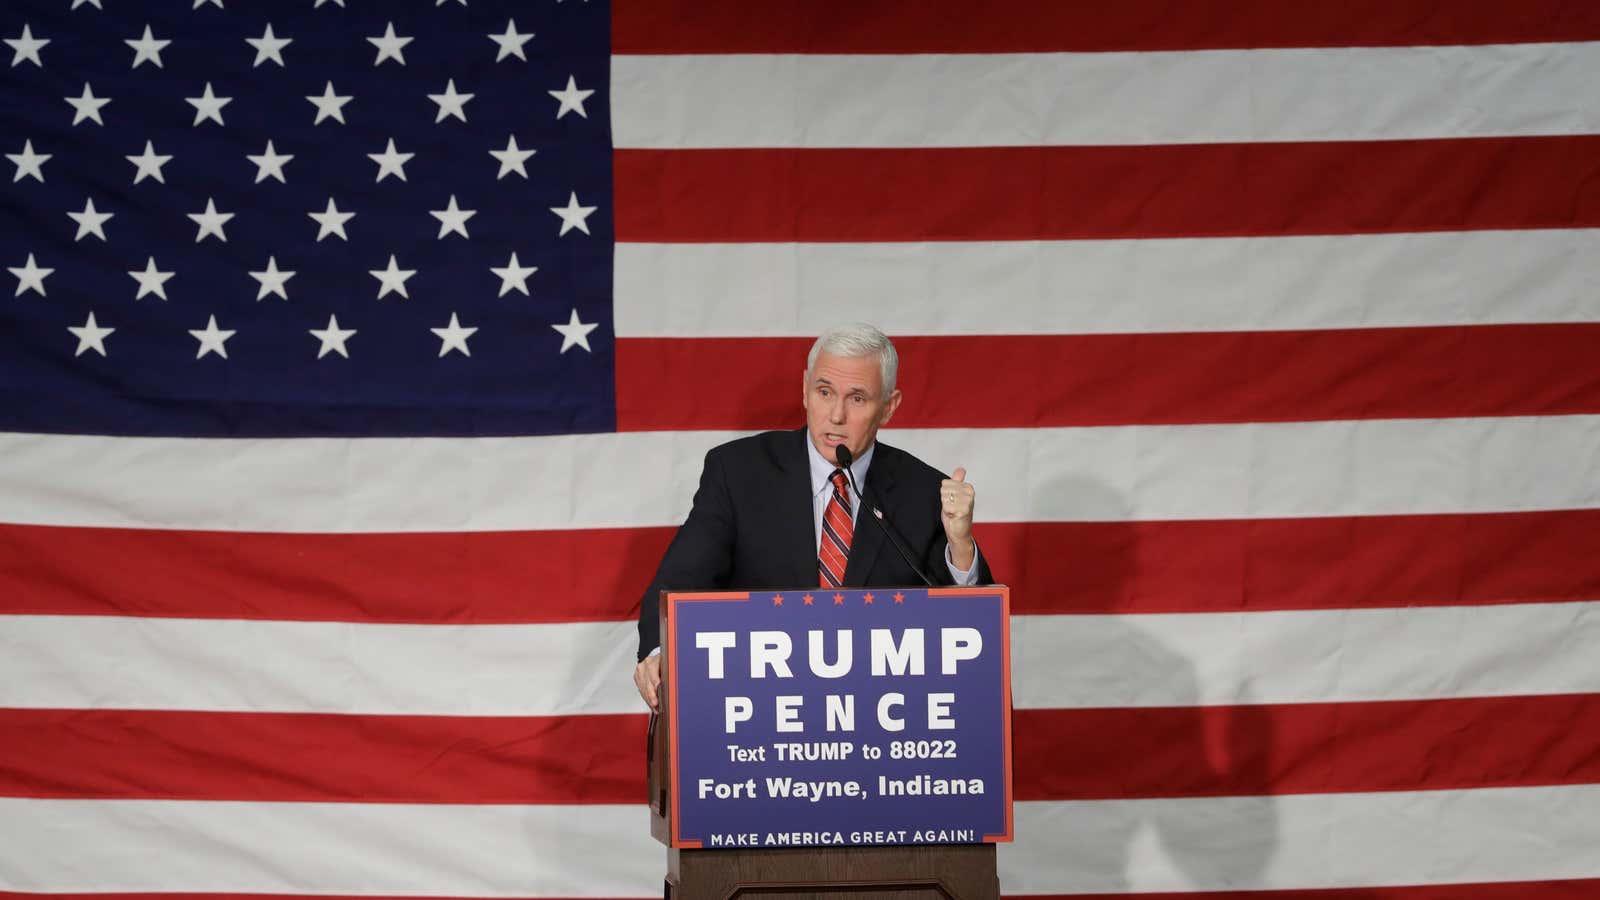 Indiana governor Mike Pence identifies as an “Evangelical Catholic.”